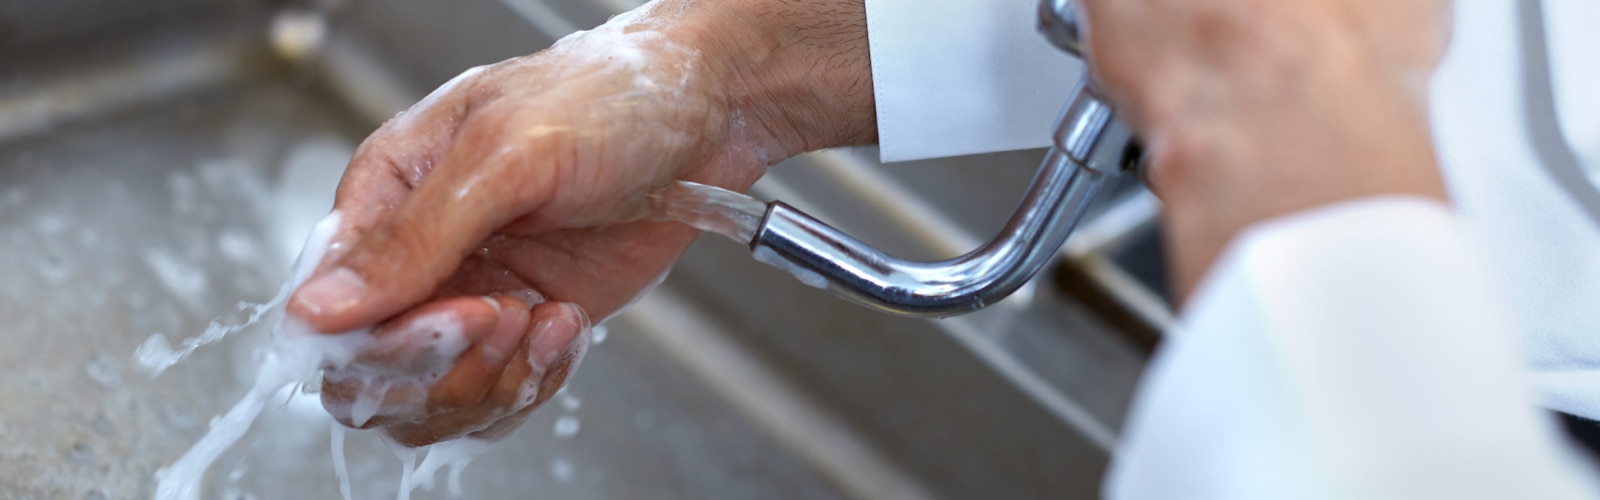 Hand washing in restaurants and foodservice